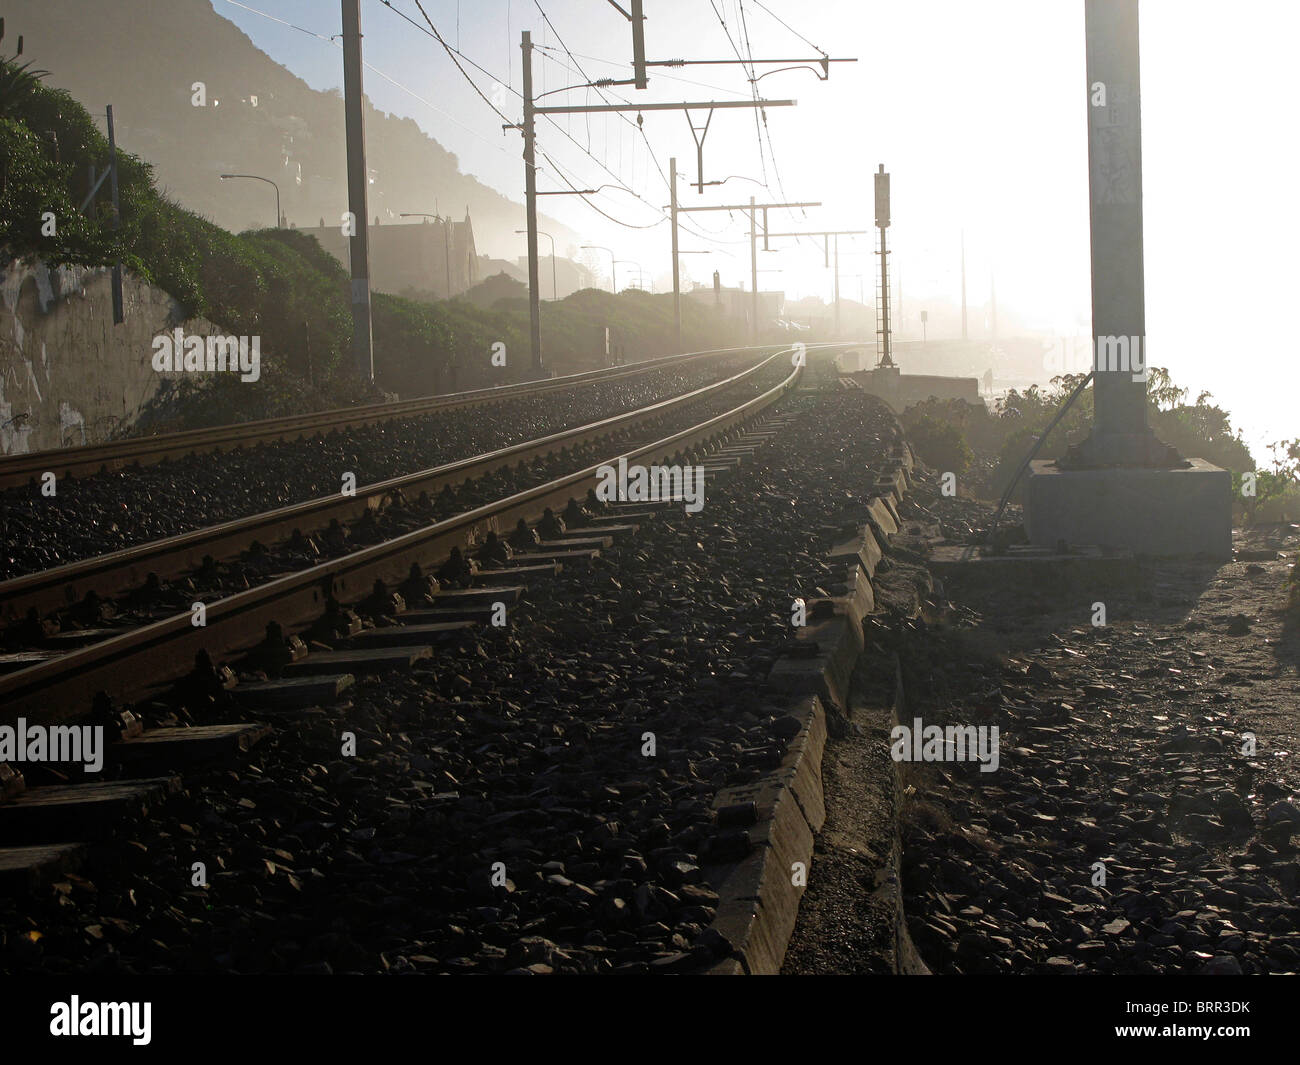 Railway lines and overhead cables on a misty morning Stock Photo